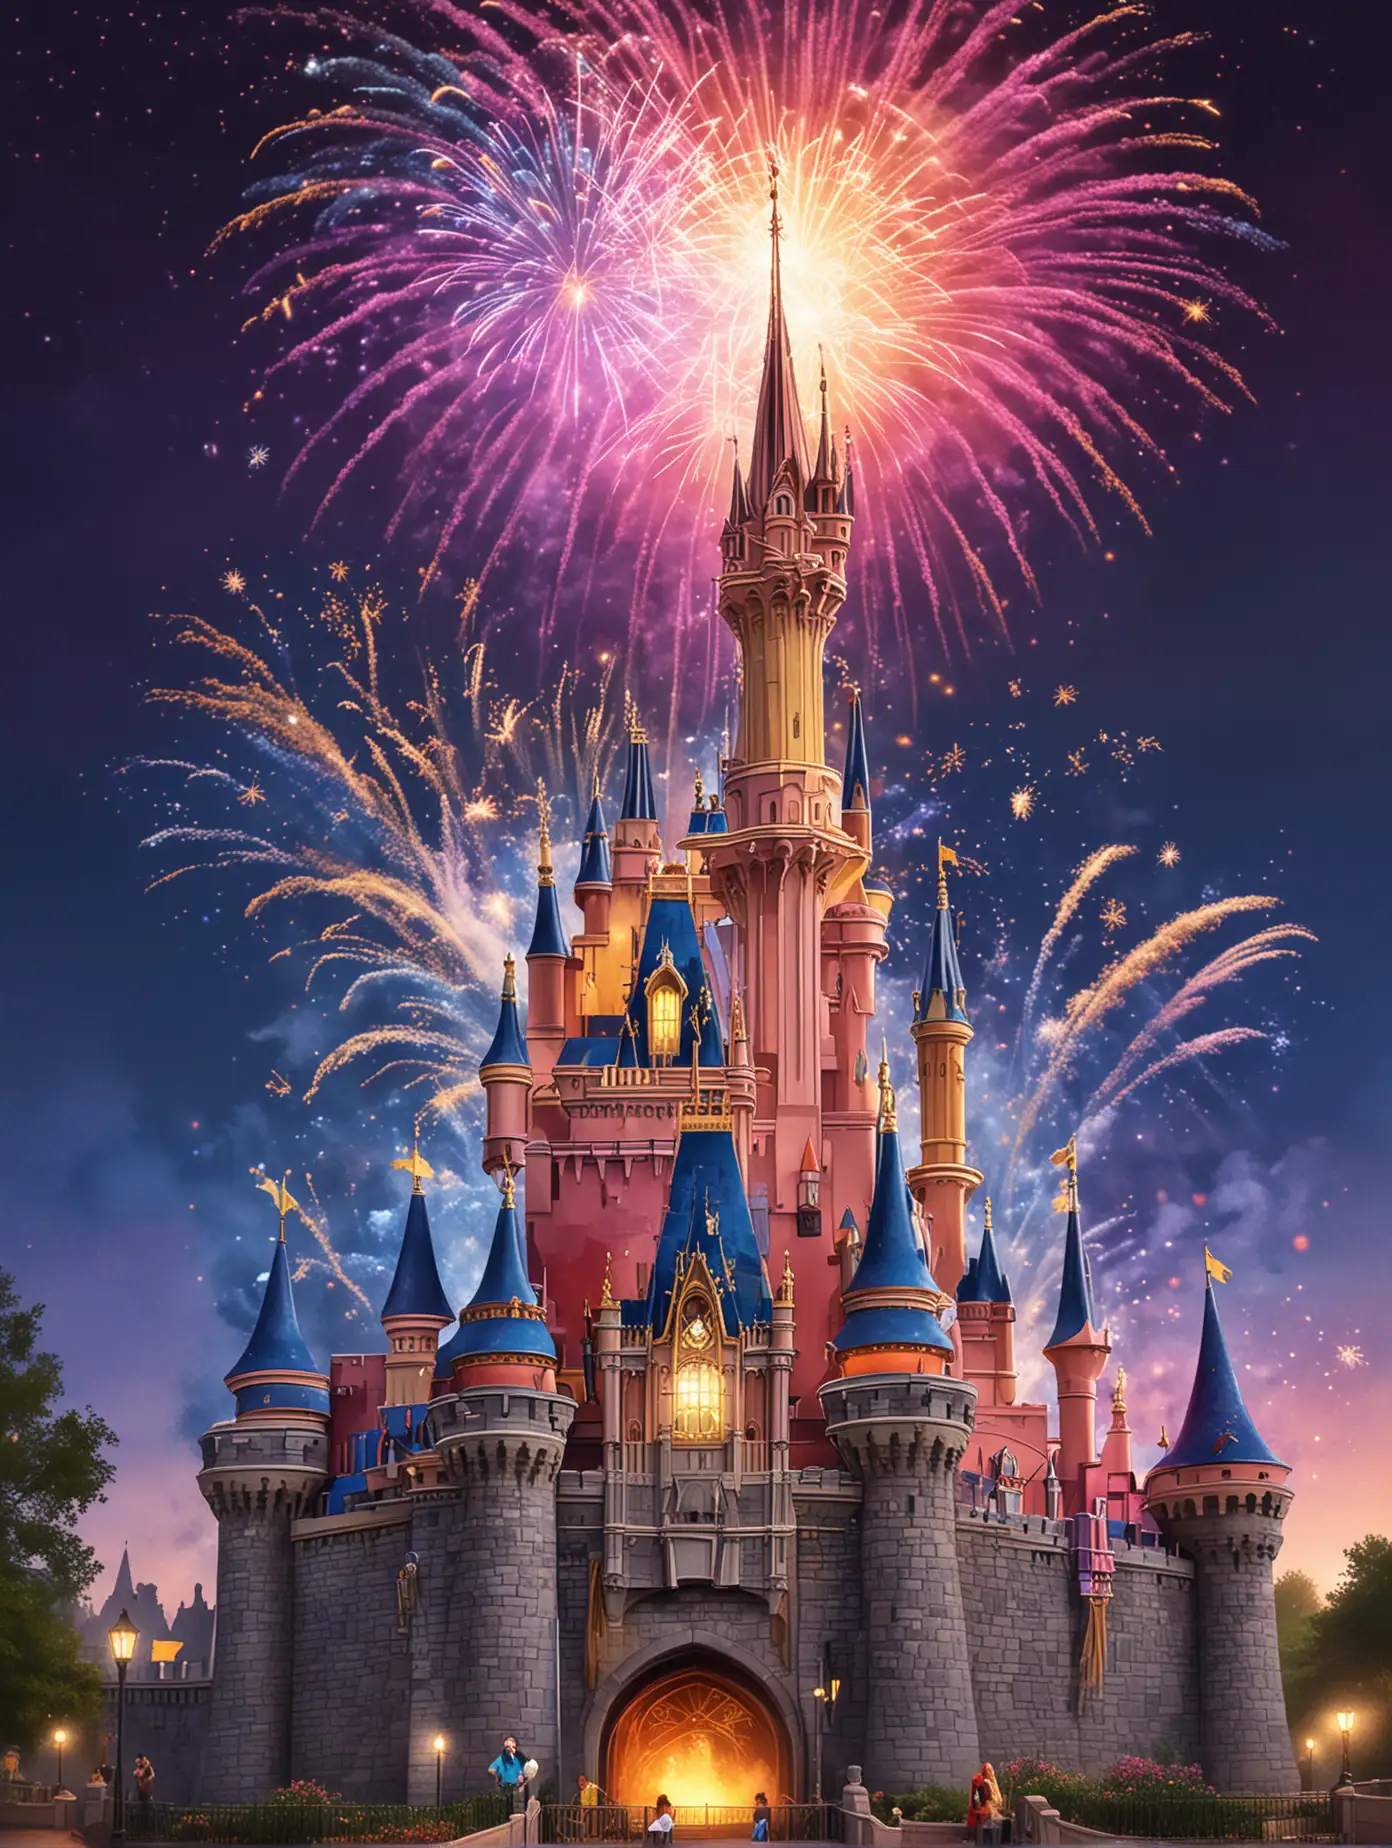 Create an Illustration of Sleeping Beauty's Castle at Disneyland in Anaheim, red, blue, yellow, pink, purple fireworks exploding above the castle, subdued colors